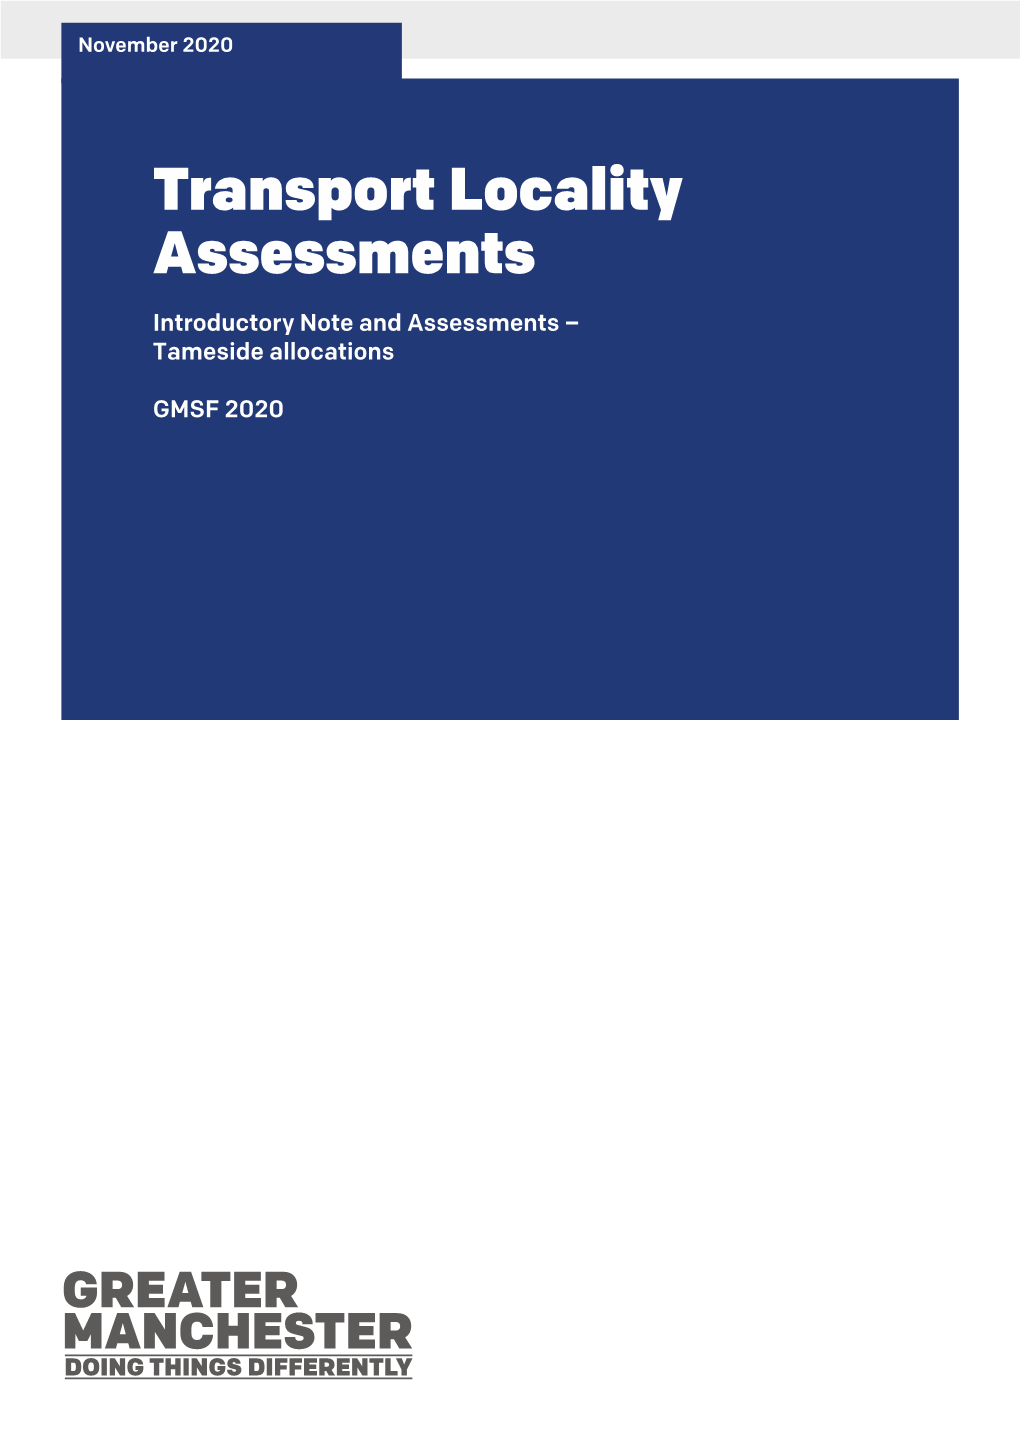 Tameside Locality Assessments GMSF 2020